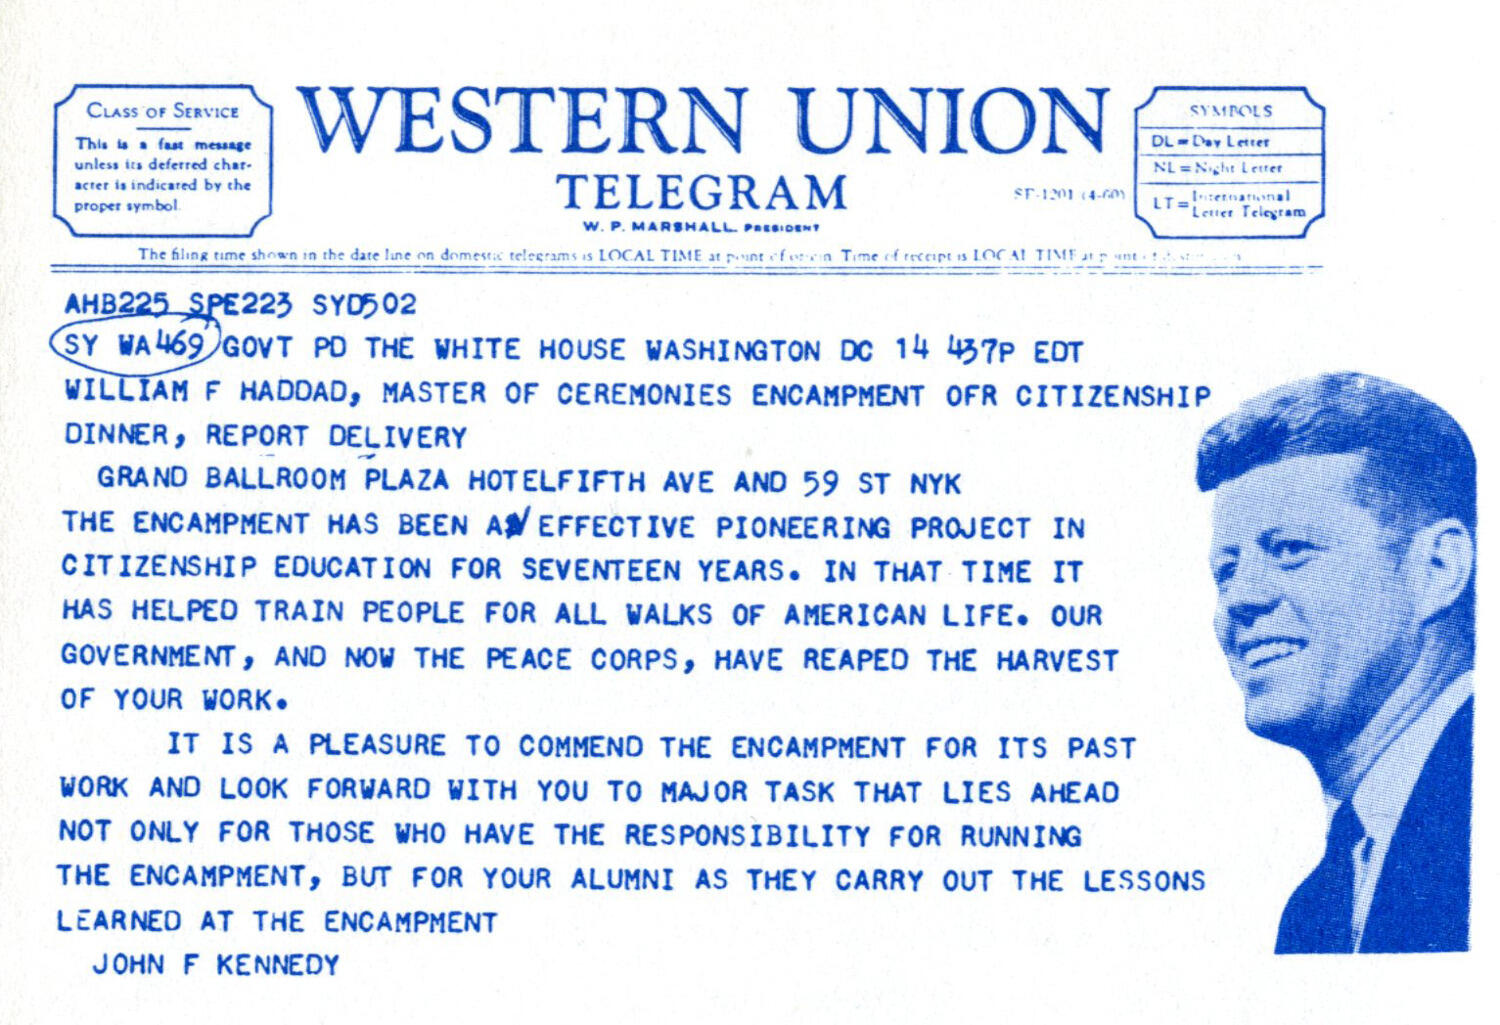 Image of telegram from President John F. Kennedy to William F. Haddad, master of ceremonies for an Encampment for Citizenship dinner, which was reprinted in the group's 1964 recruitment brochure. 
<br>Source: VCU Libraries' "Encampment for Citizenship: Education for Democratic Living" digital exhibit.
